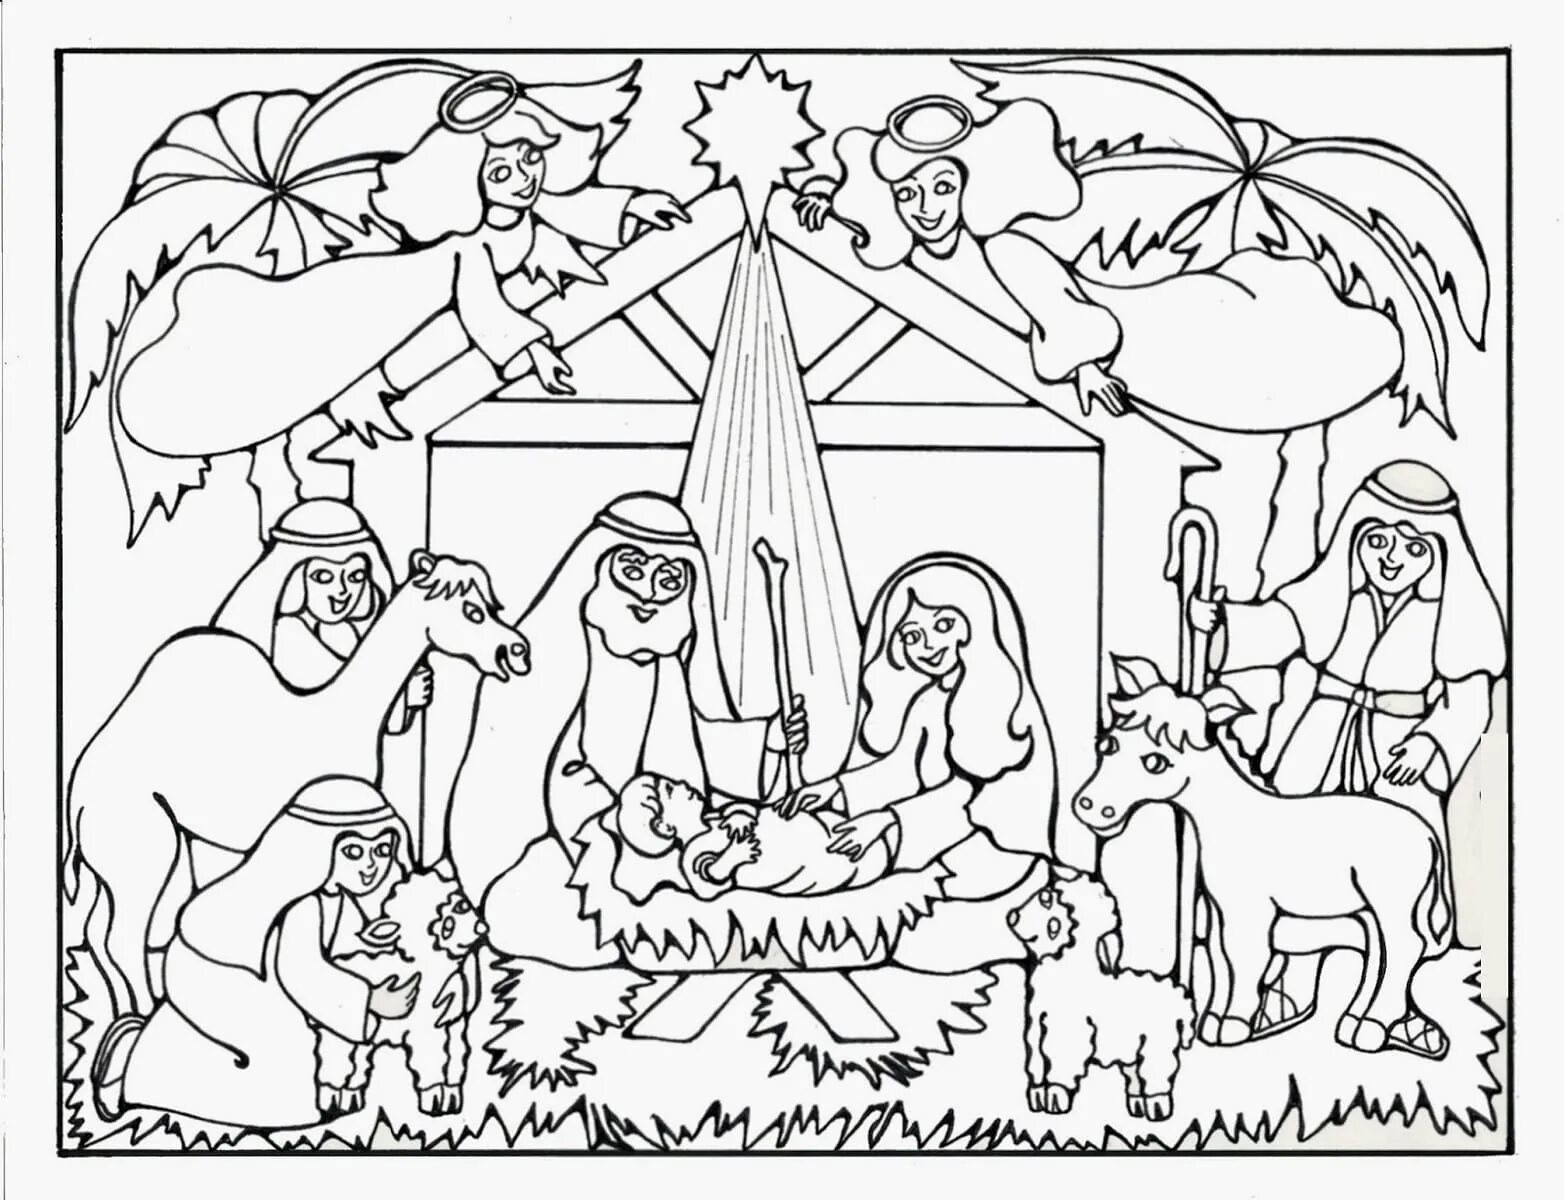 Dazzling Christmas Eve coloring book